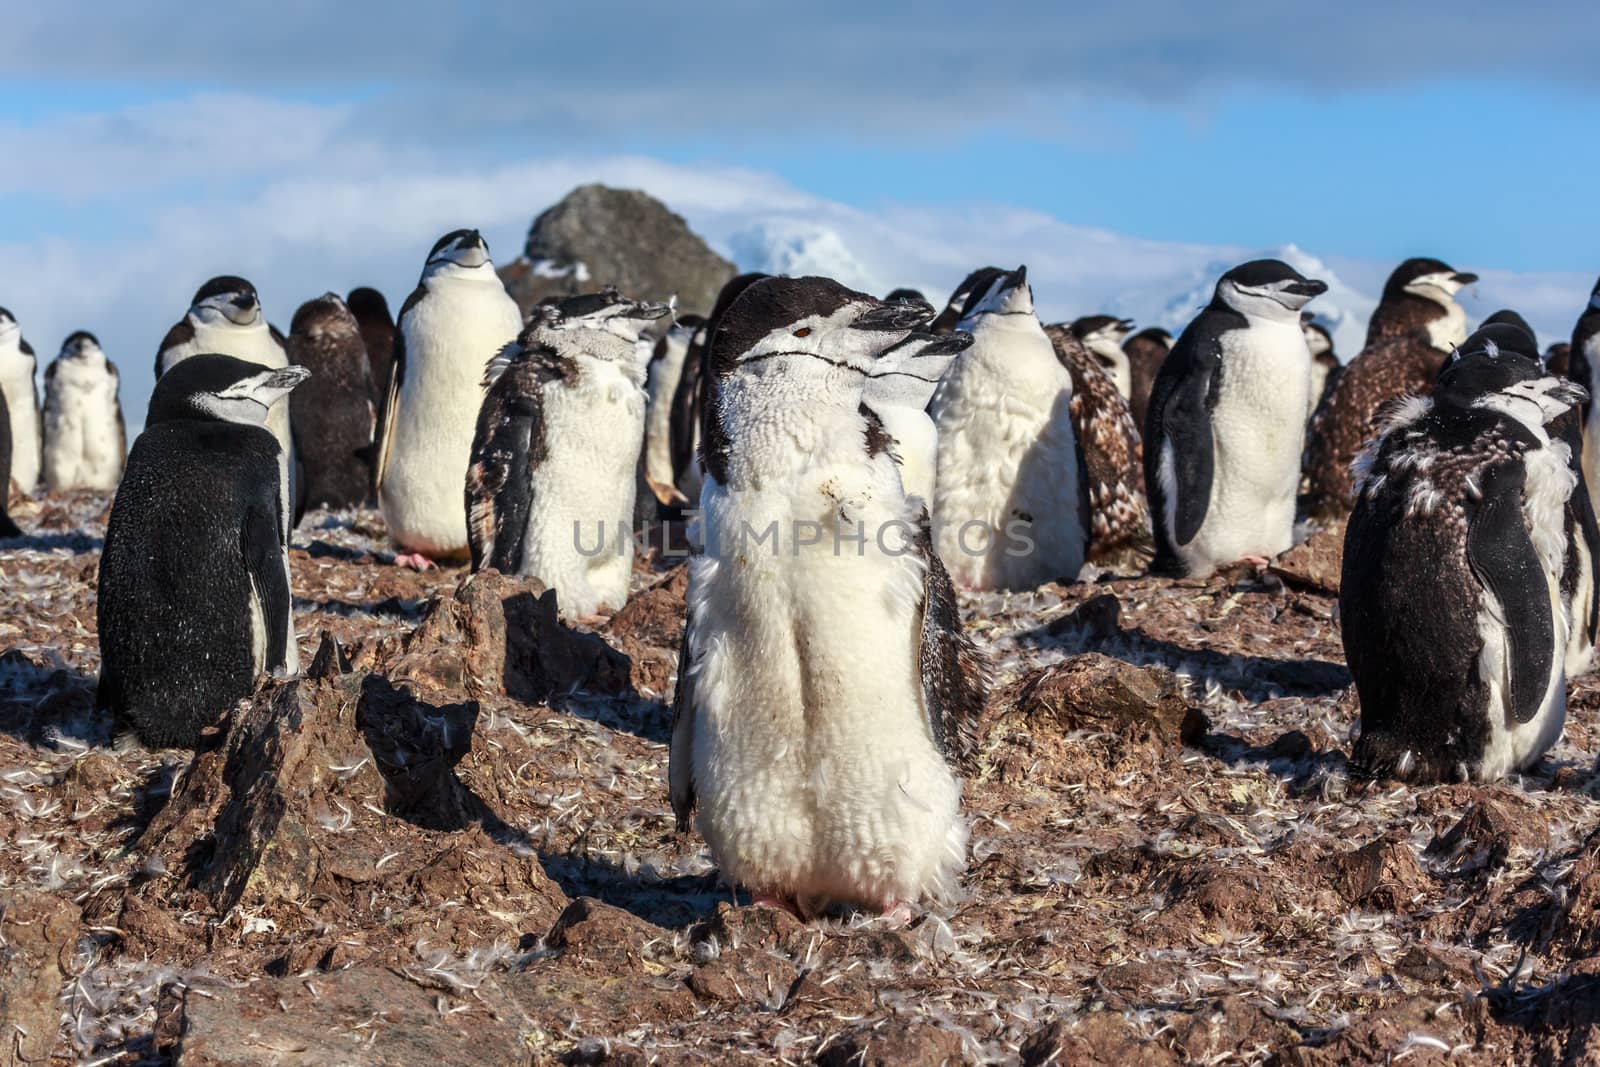 1y old chinstrap chick penguin standing among his colony members gathered on the rocks, Half Moon Island, Antarctic